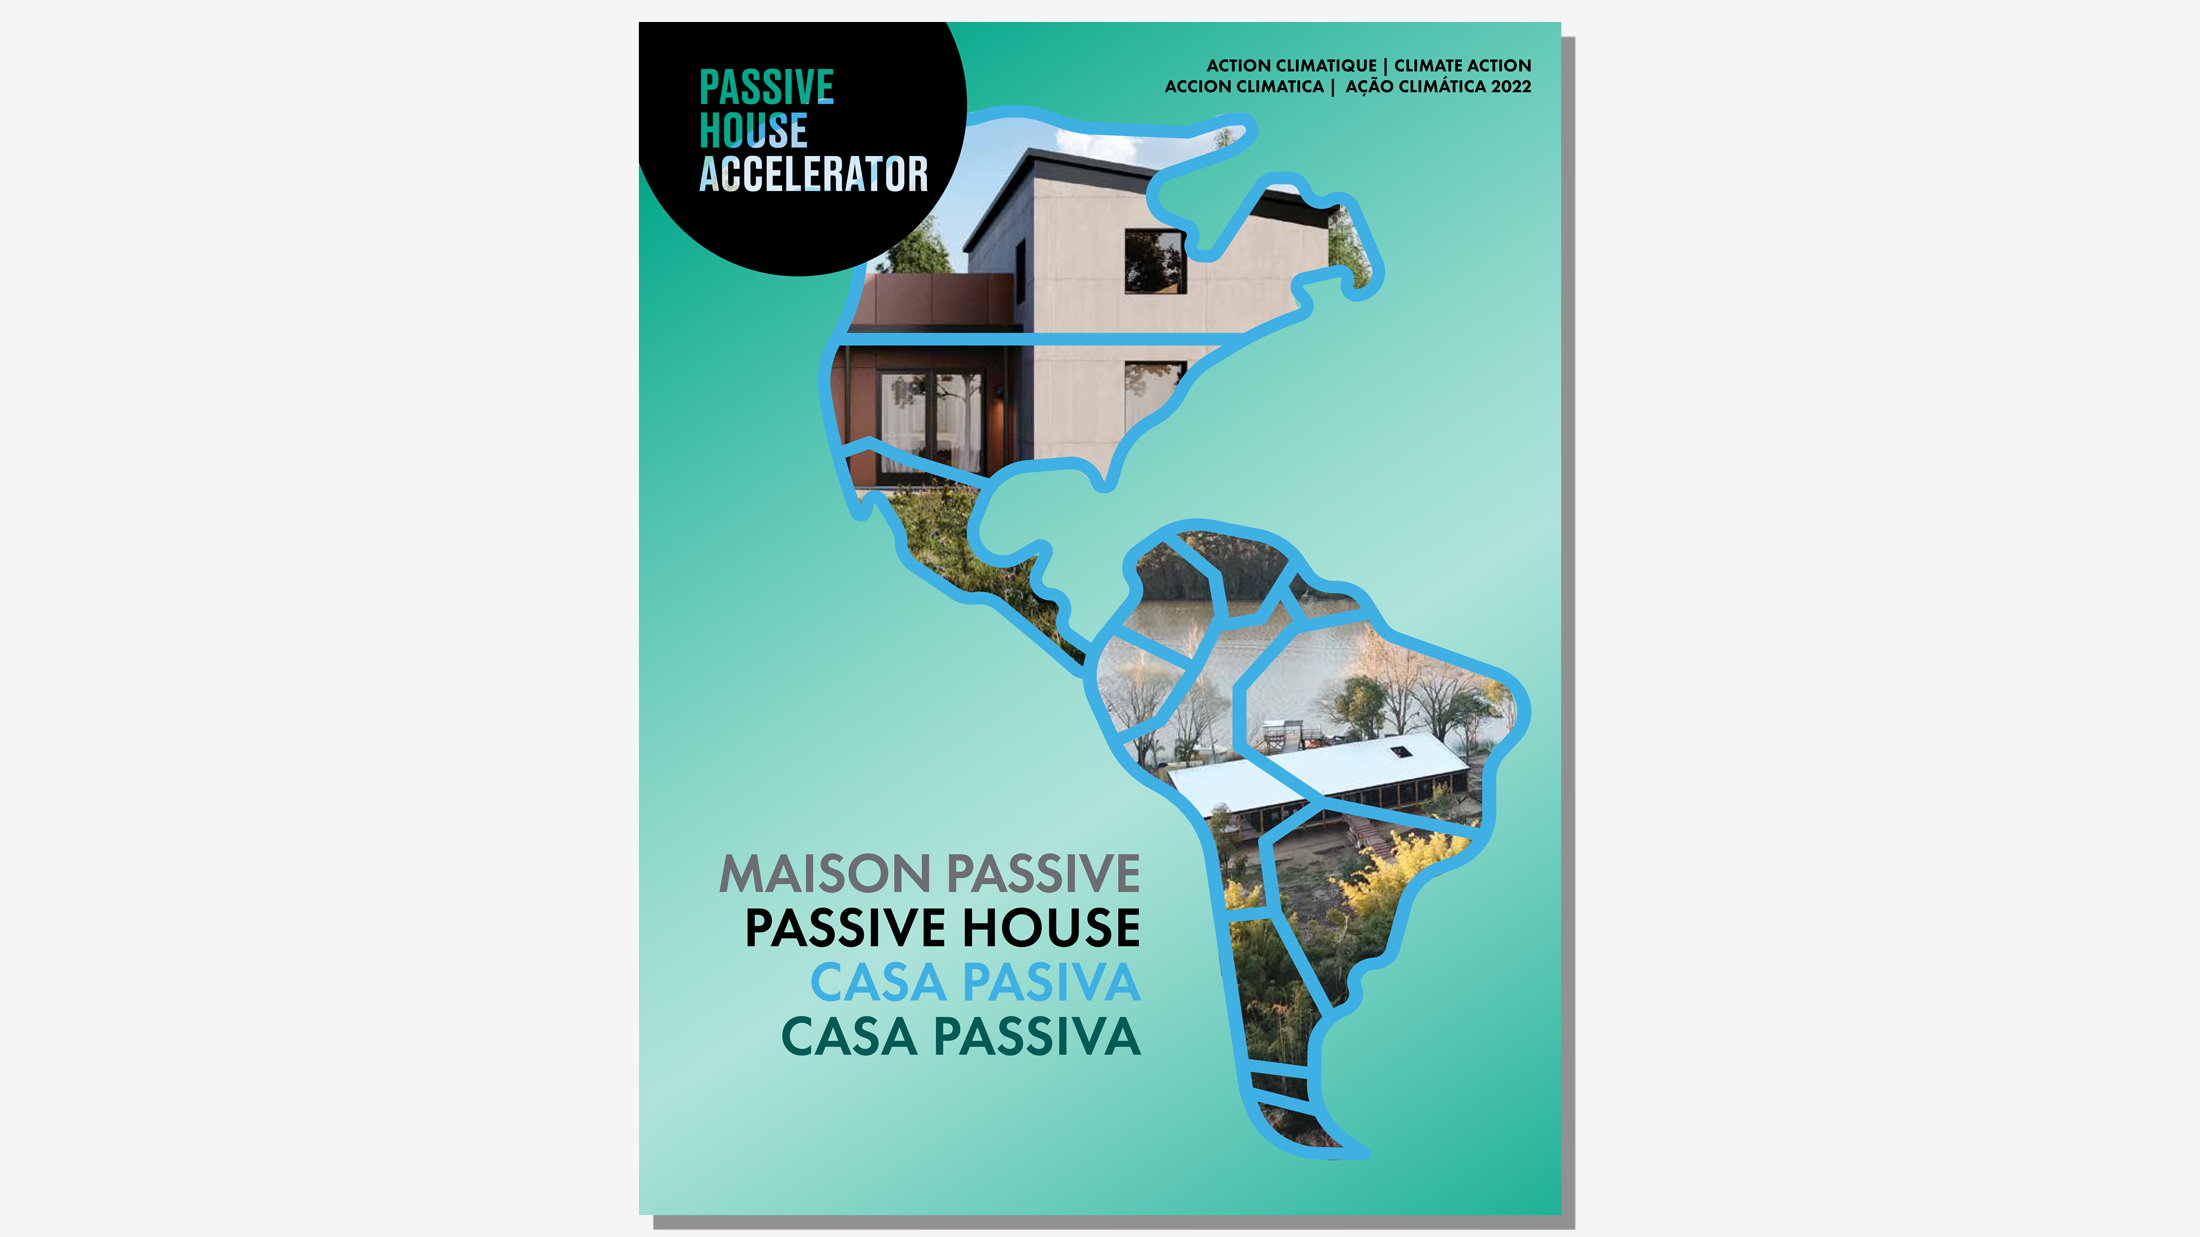 Passive House Accelerator Magazine Now Available: Time for action, not “blah, blah, blah”